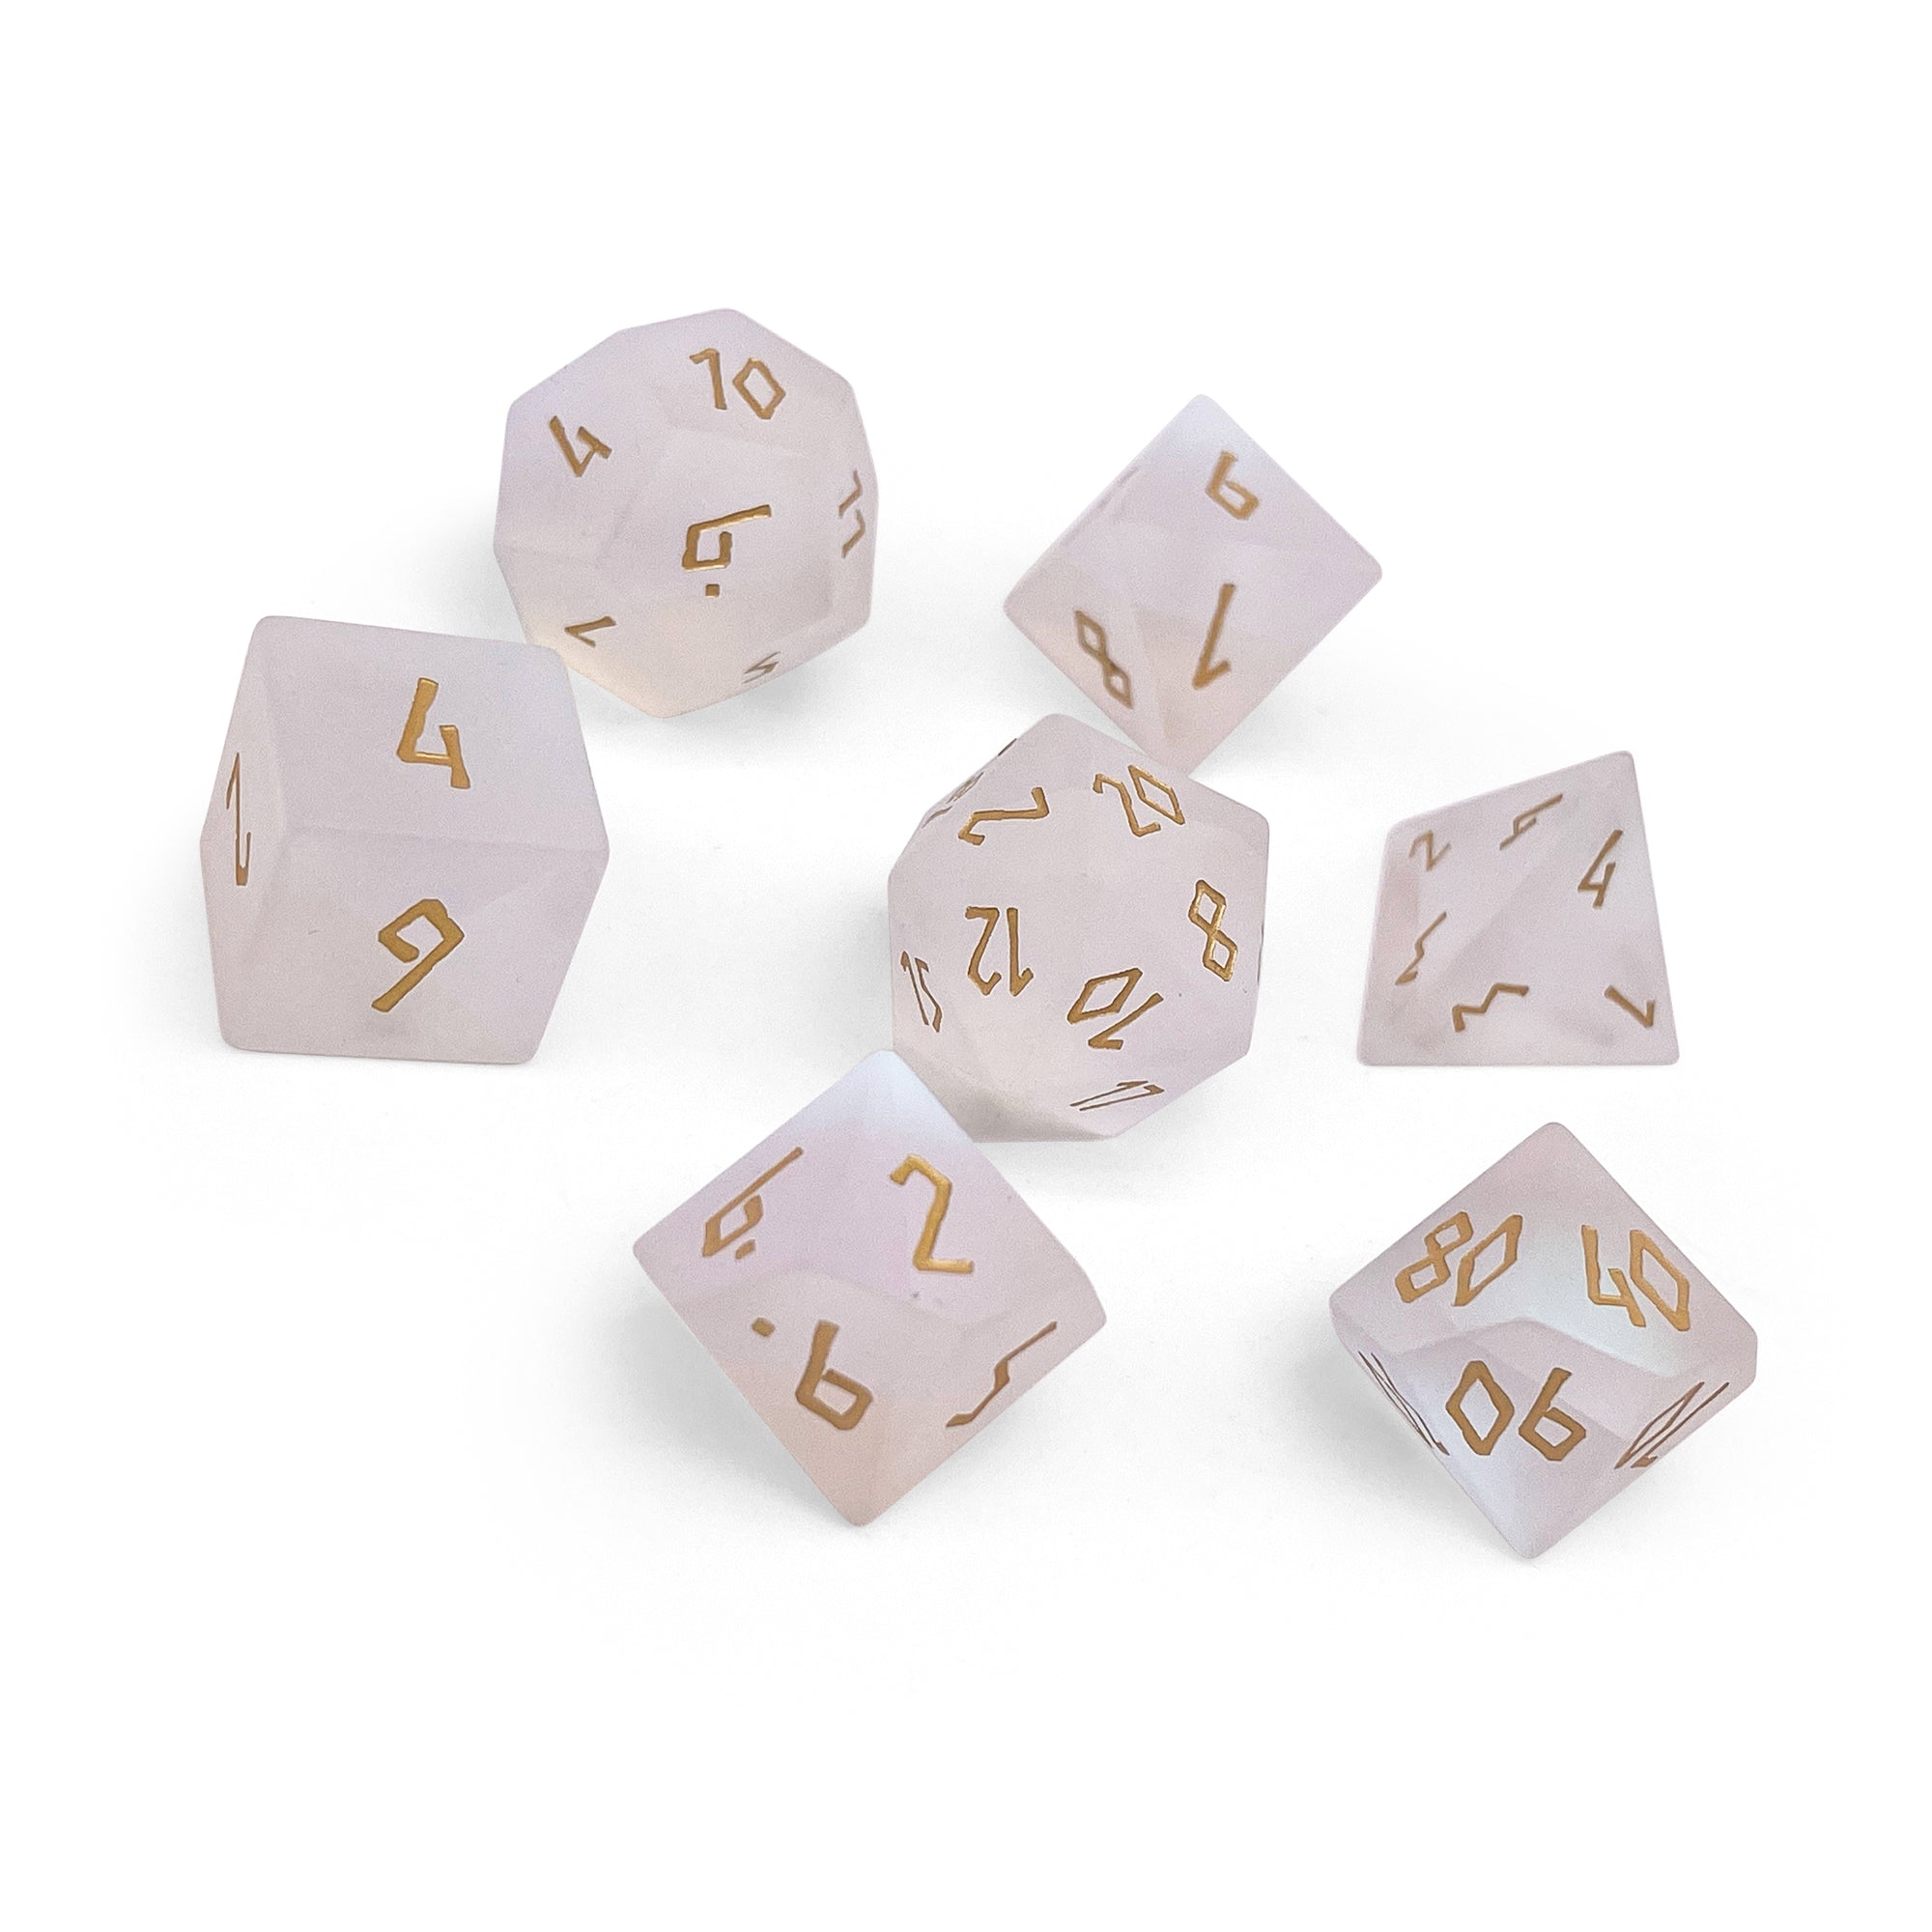 Frosted K9 Rainbow Glass - Gold Font 7 Piece RPG Set K9 Glass Dice - NOR 01525